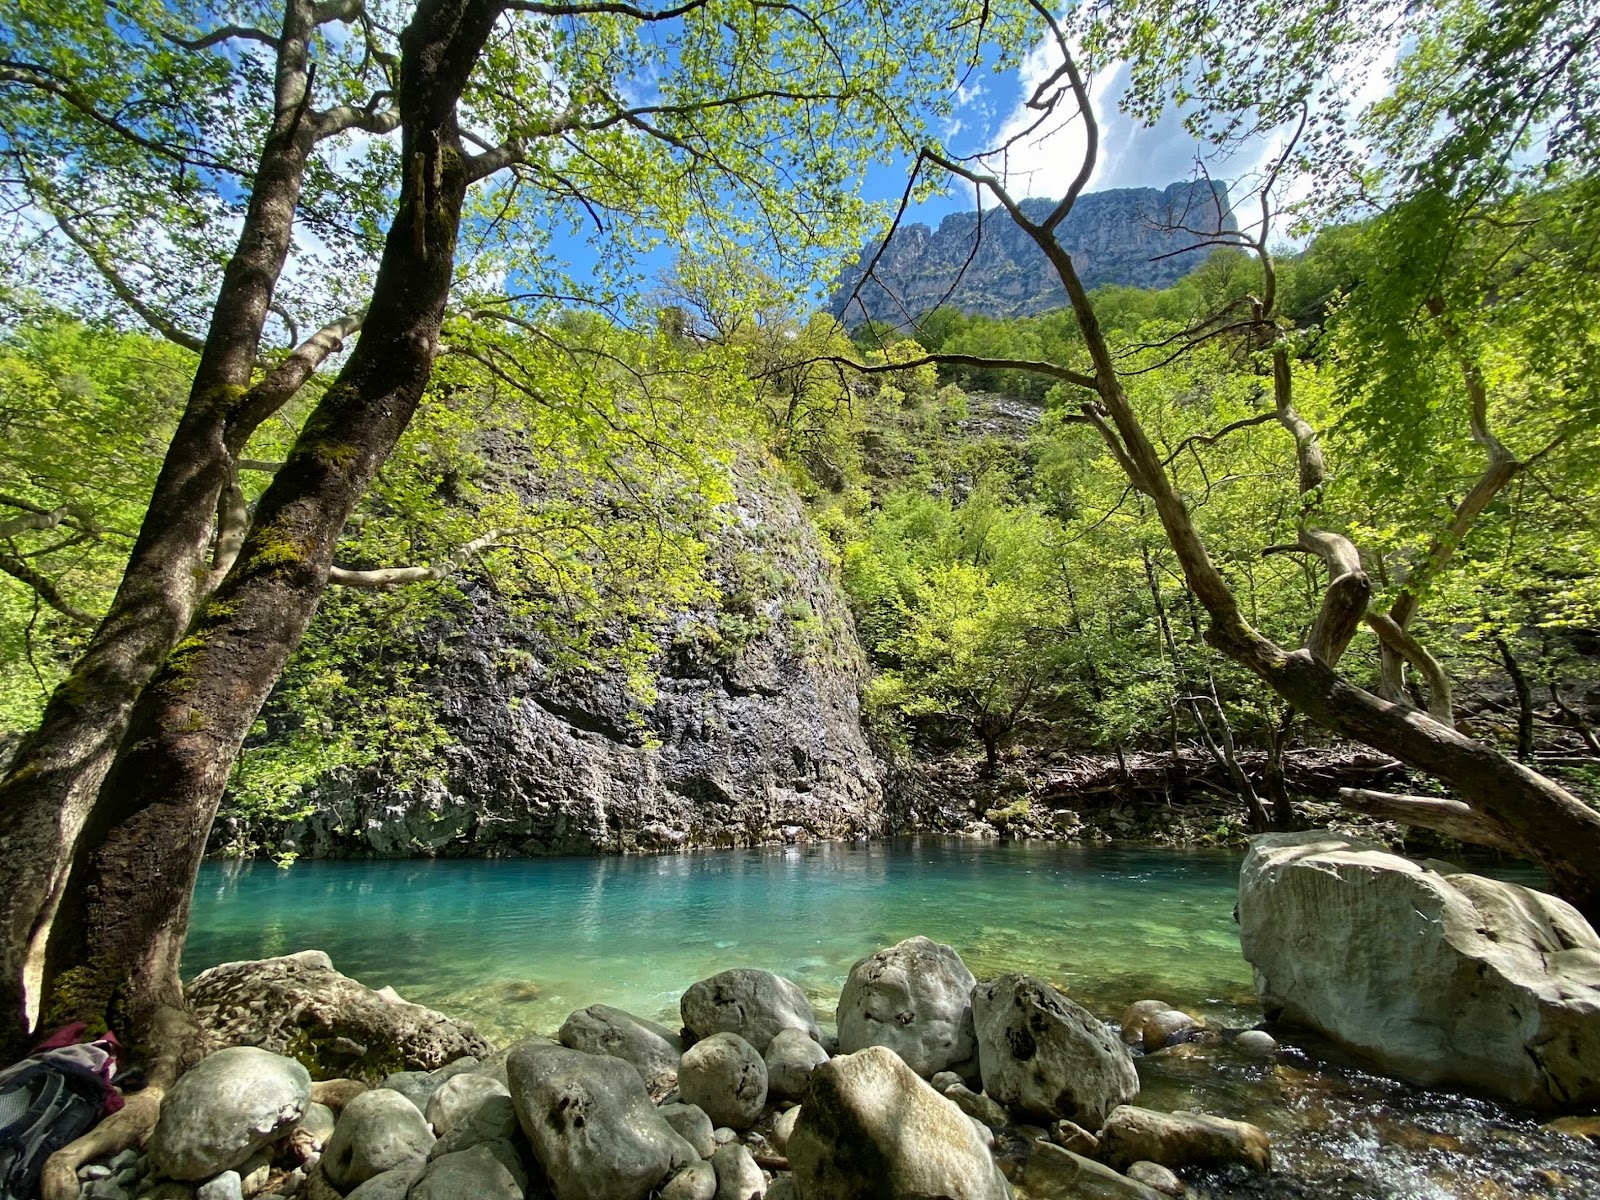 Turquoise river water lined by green trees and rocky banks